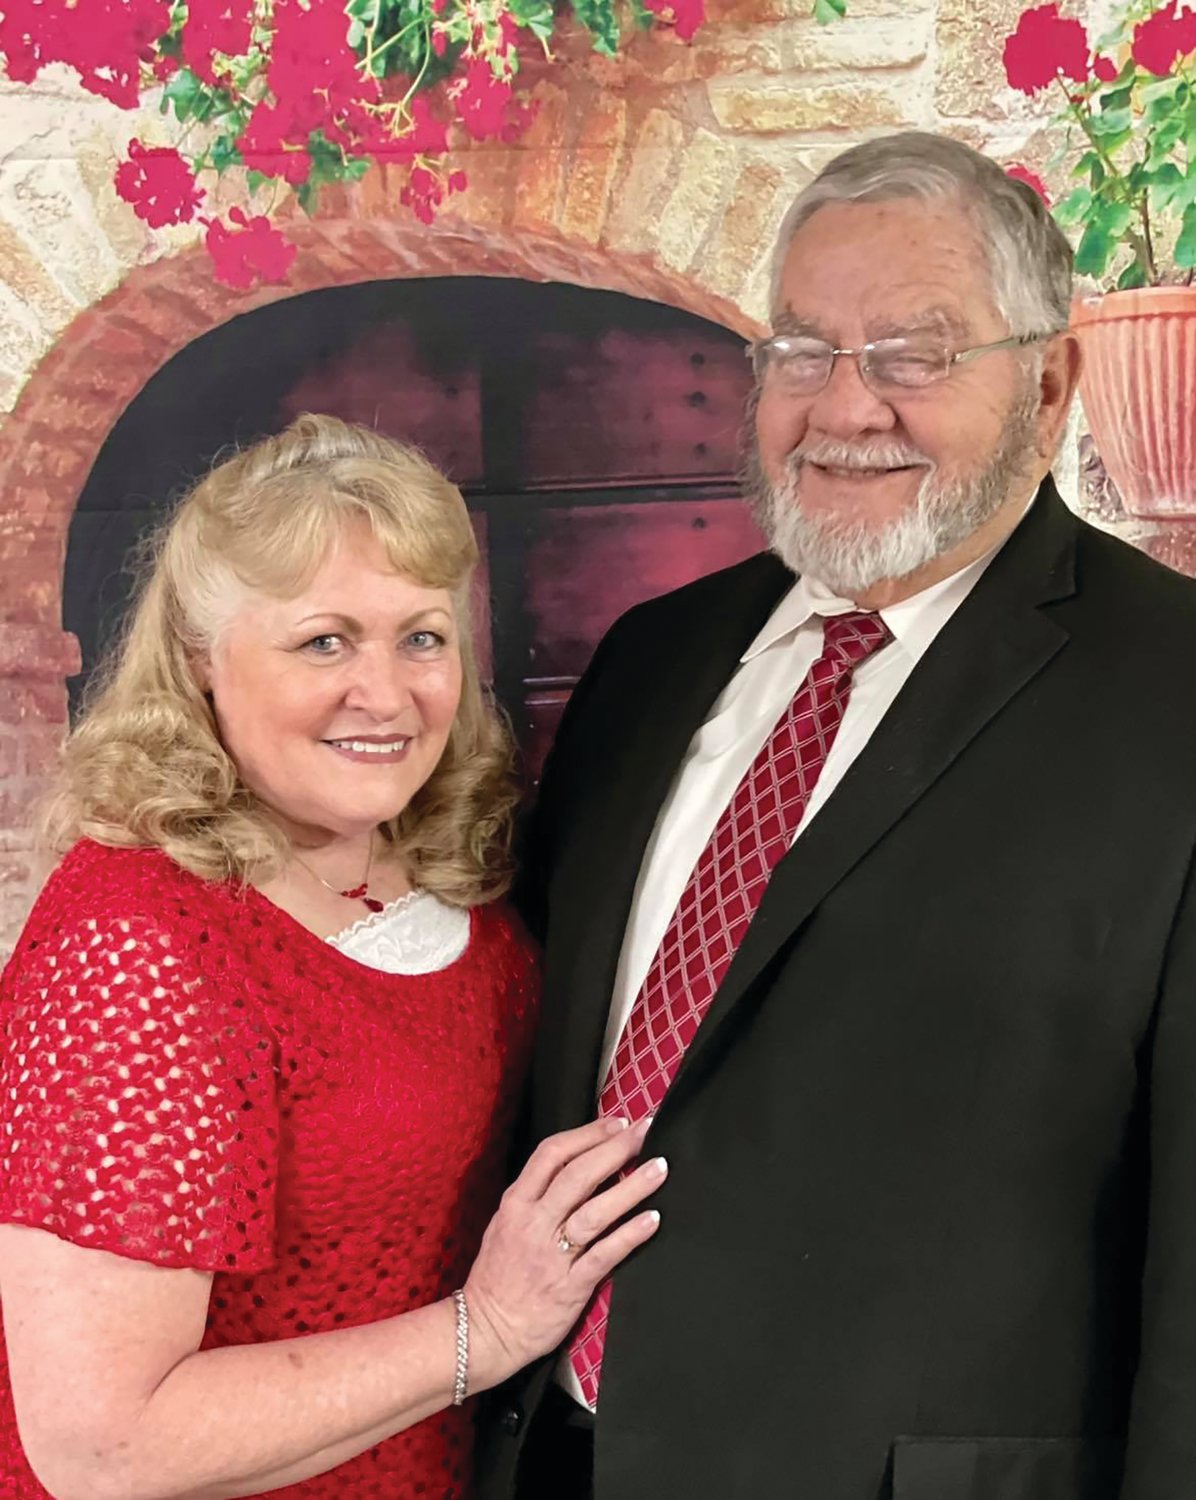 Pastor John Jarriel and his wife Sherry have been serving Victory Baptist Church for 44 years.